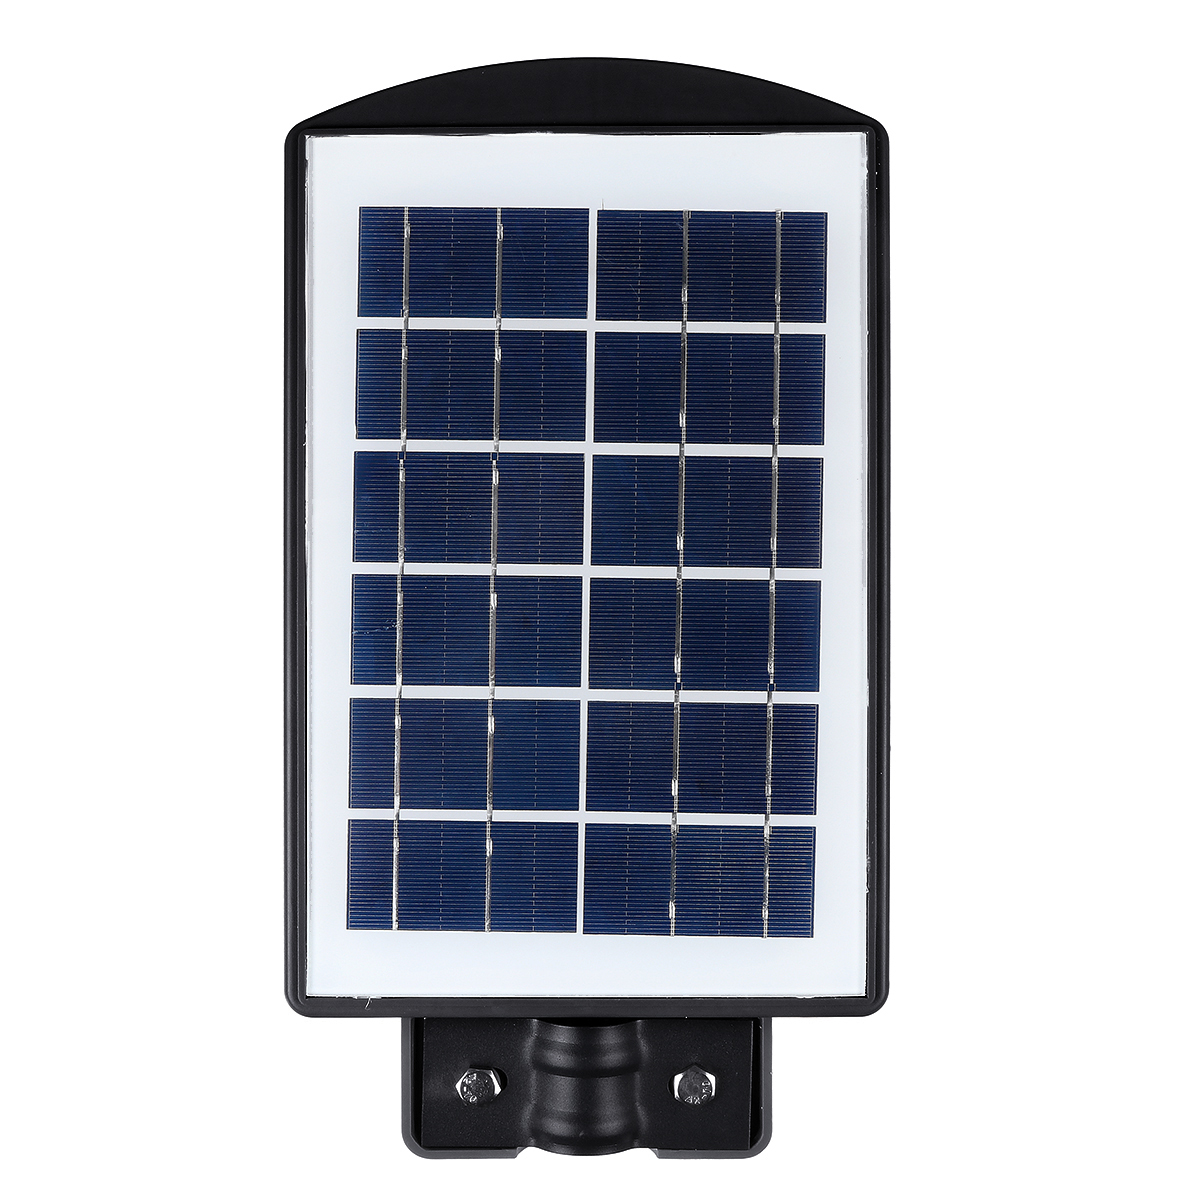 150300450LED-Solar-Light-Sensor-Timing-ControlLight-Control-Garden-Yard-Street-Lamp-with-Remote-Cont-1695720-3